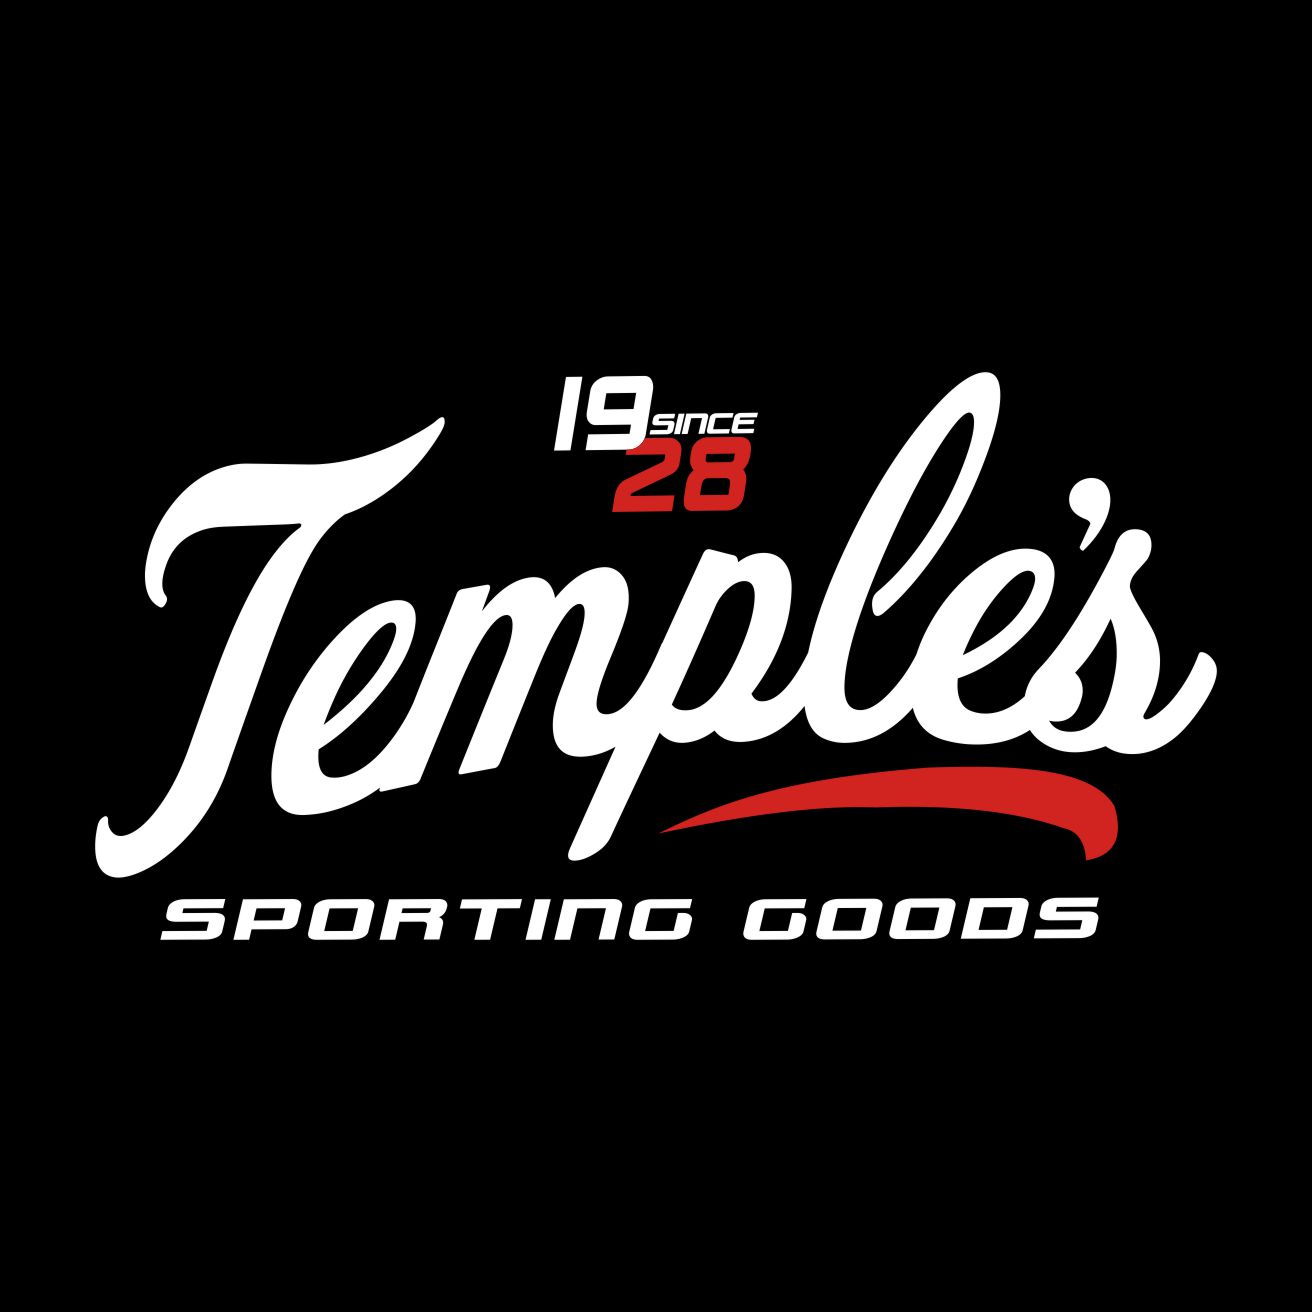 Temple's Sporting Goods